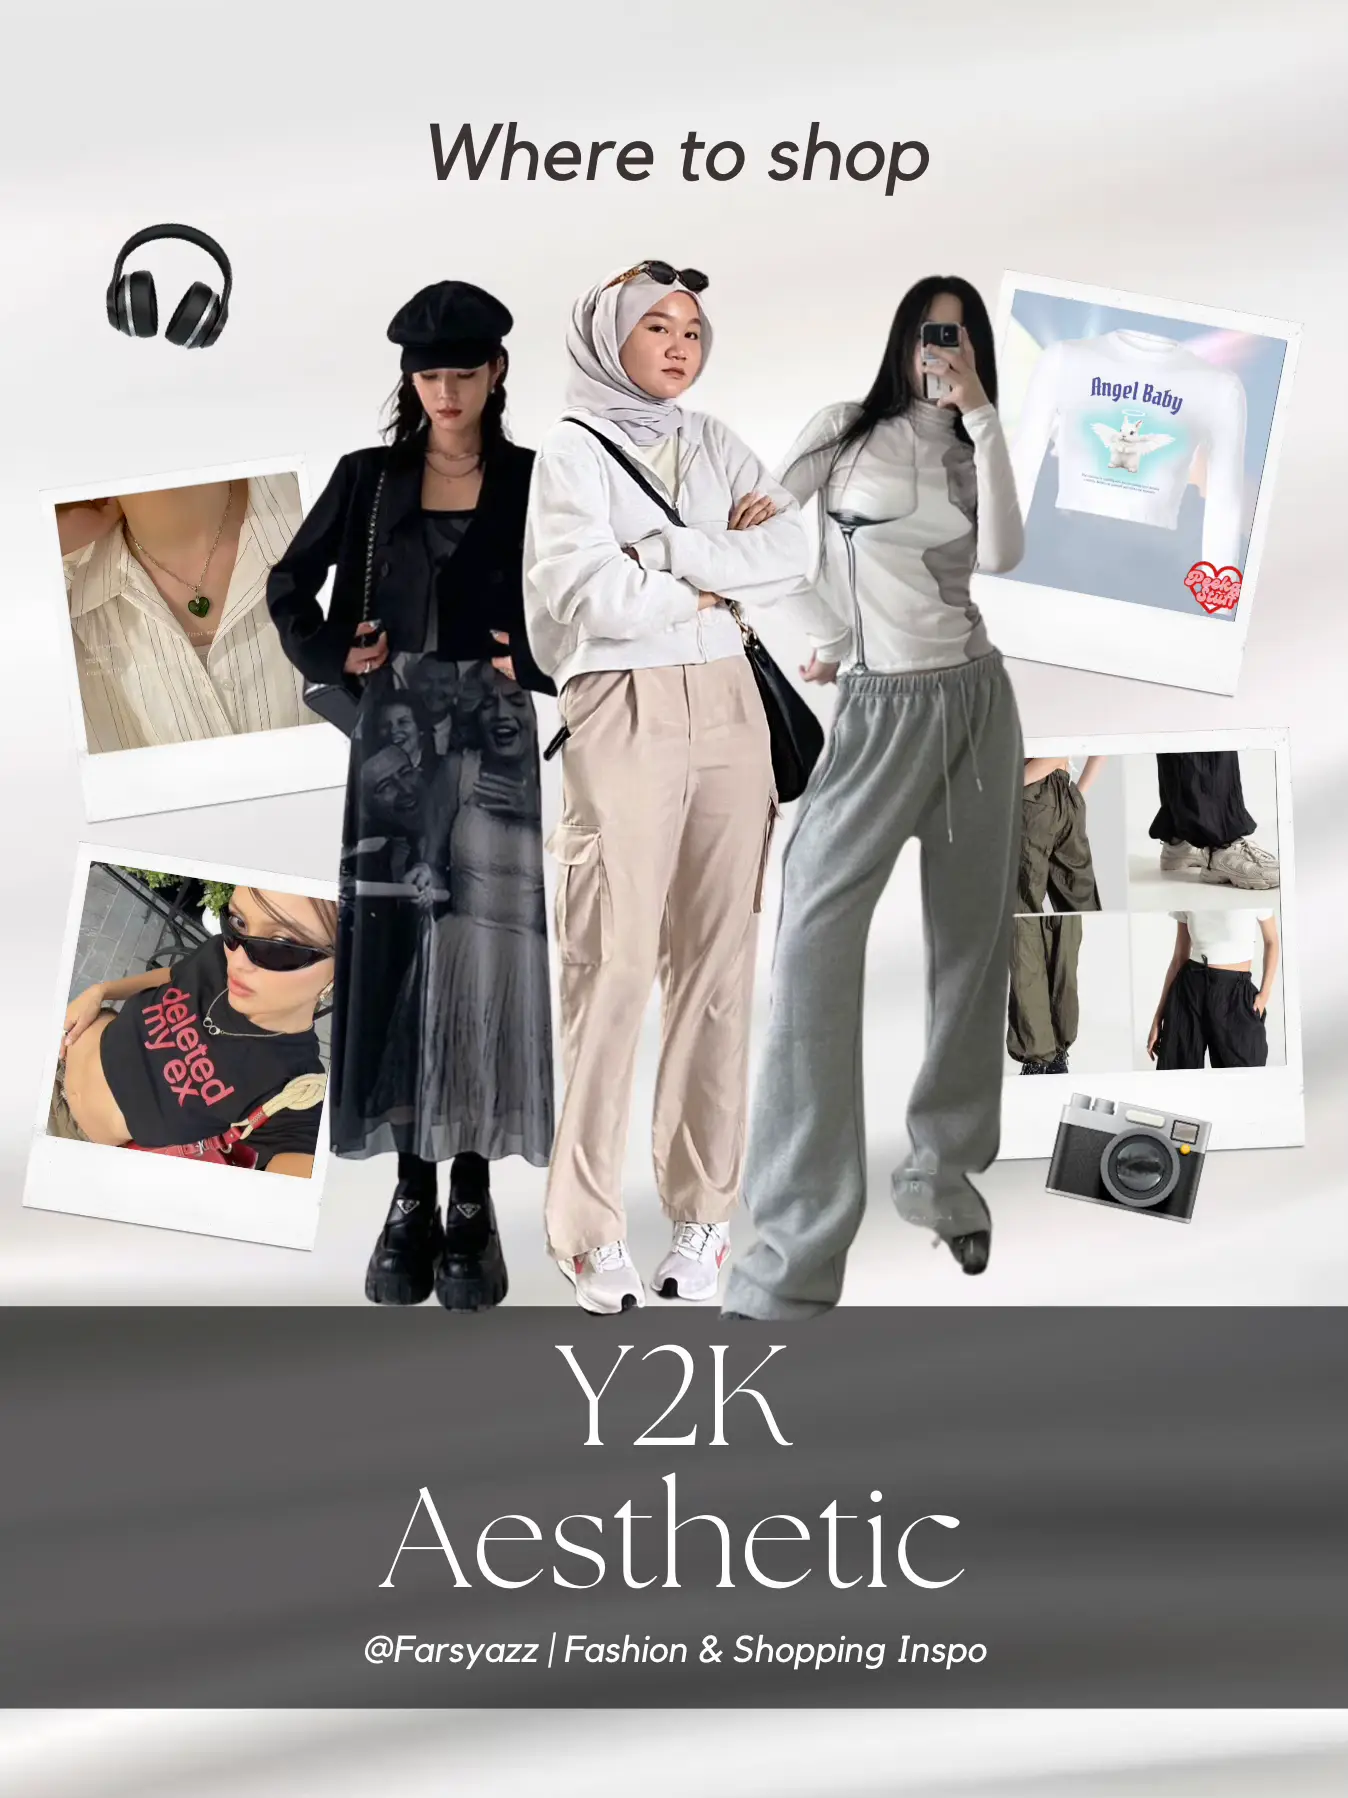 Where to shop: Y2K aesthetic🎧📸, Gallery posted by Farsya